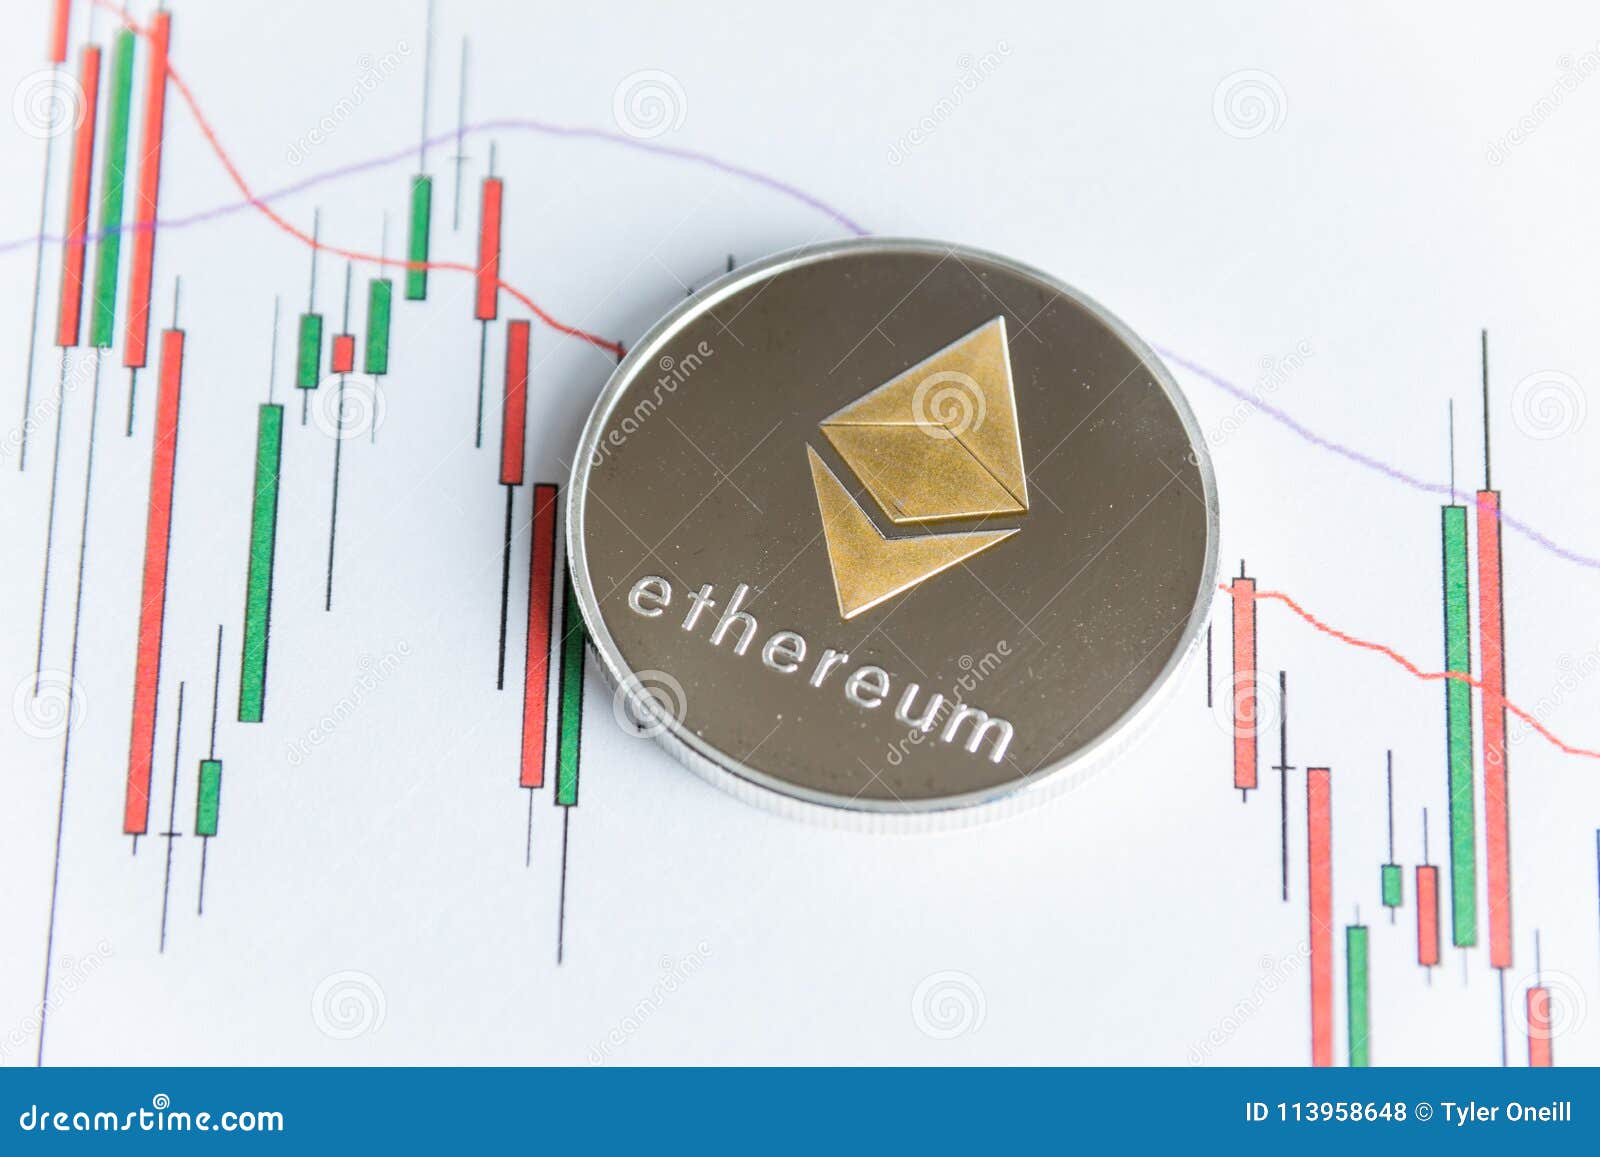 ethereum coin chart